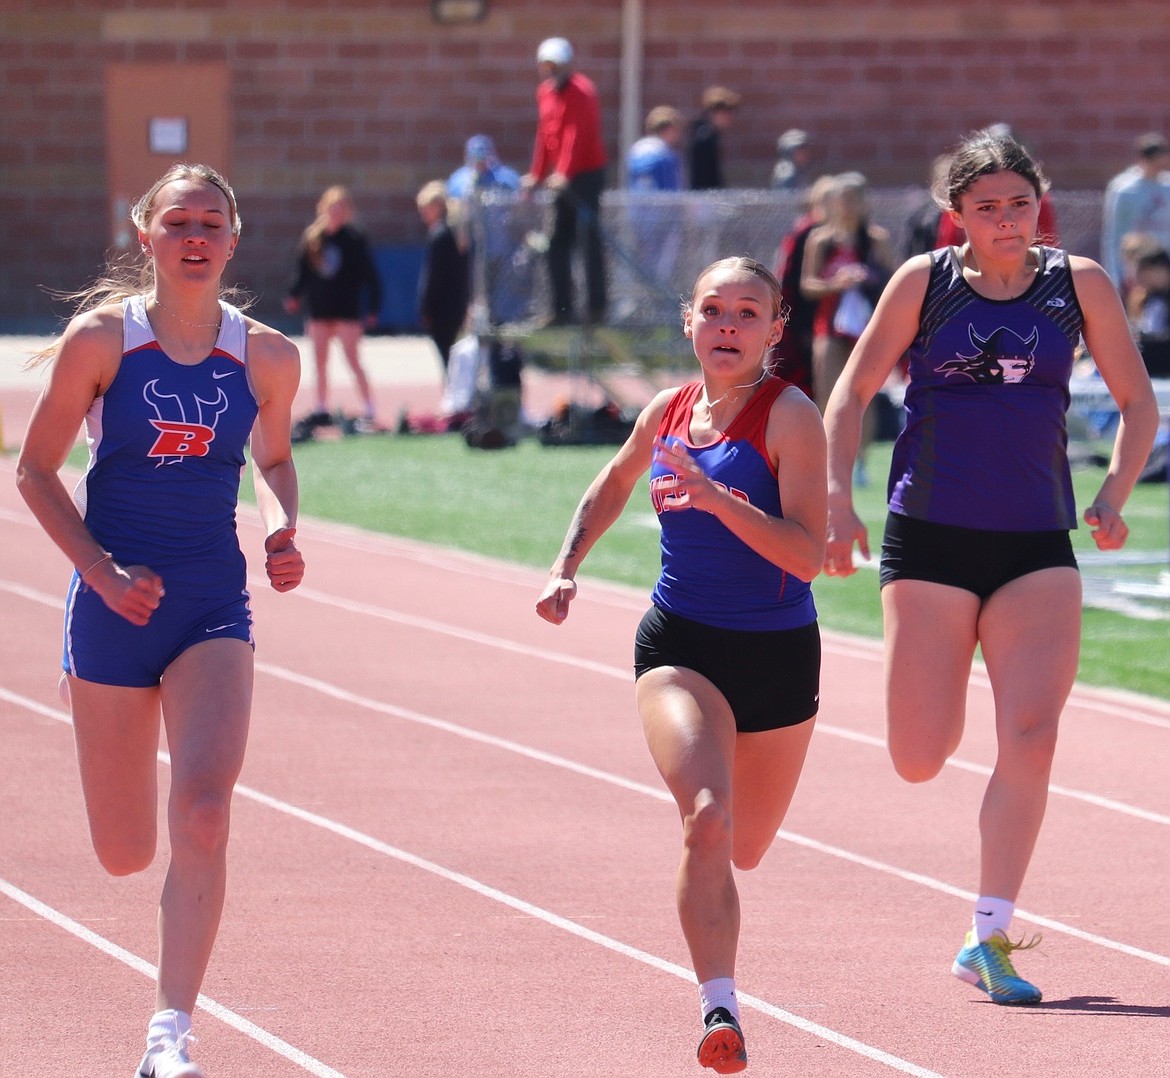 Superior sprint Alysha Ryan (center) competes in the women's 100 meter dash at this year's Seeley-Swan Invitational track meet in Missoula.  (Photo by Kami Milender)